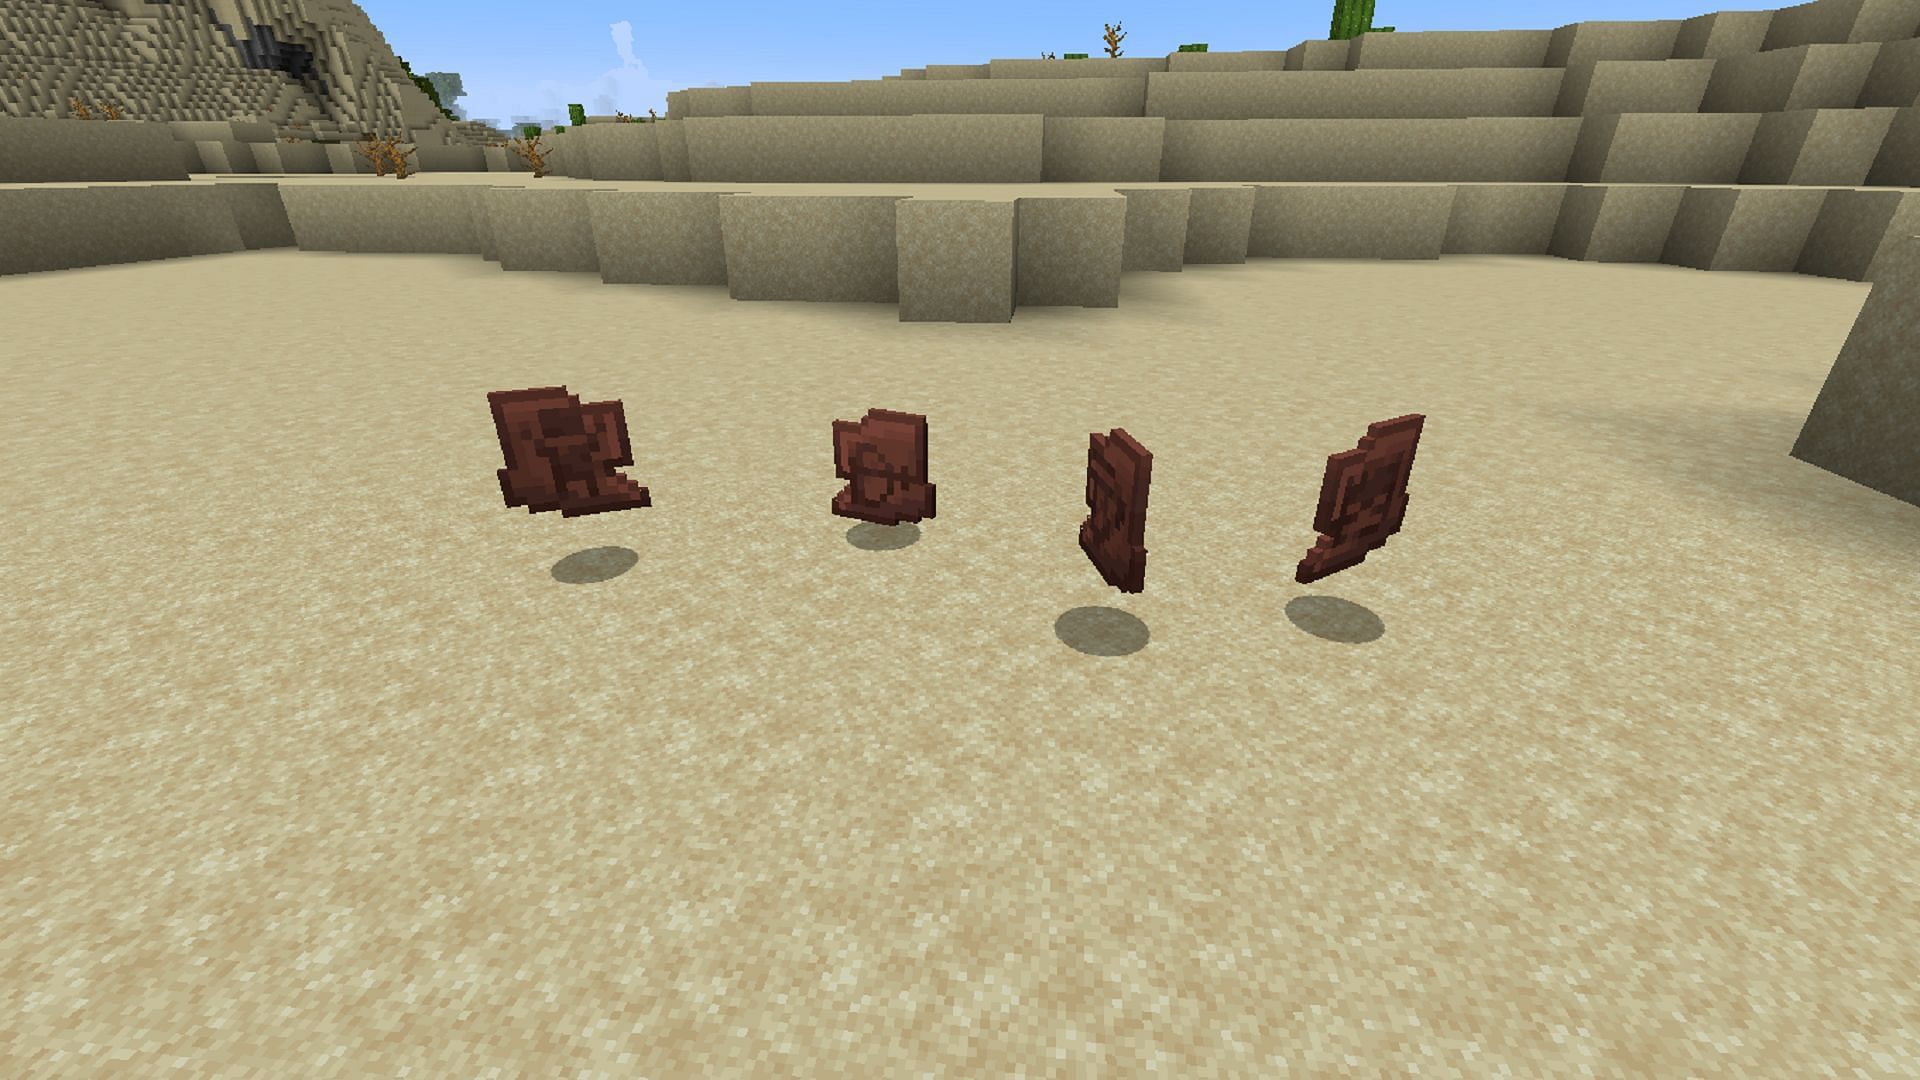 Pottery shards showing various patterns in Minecraft